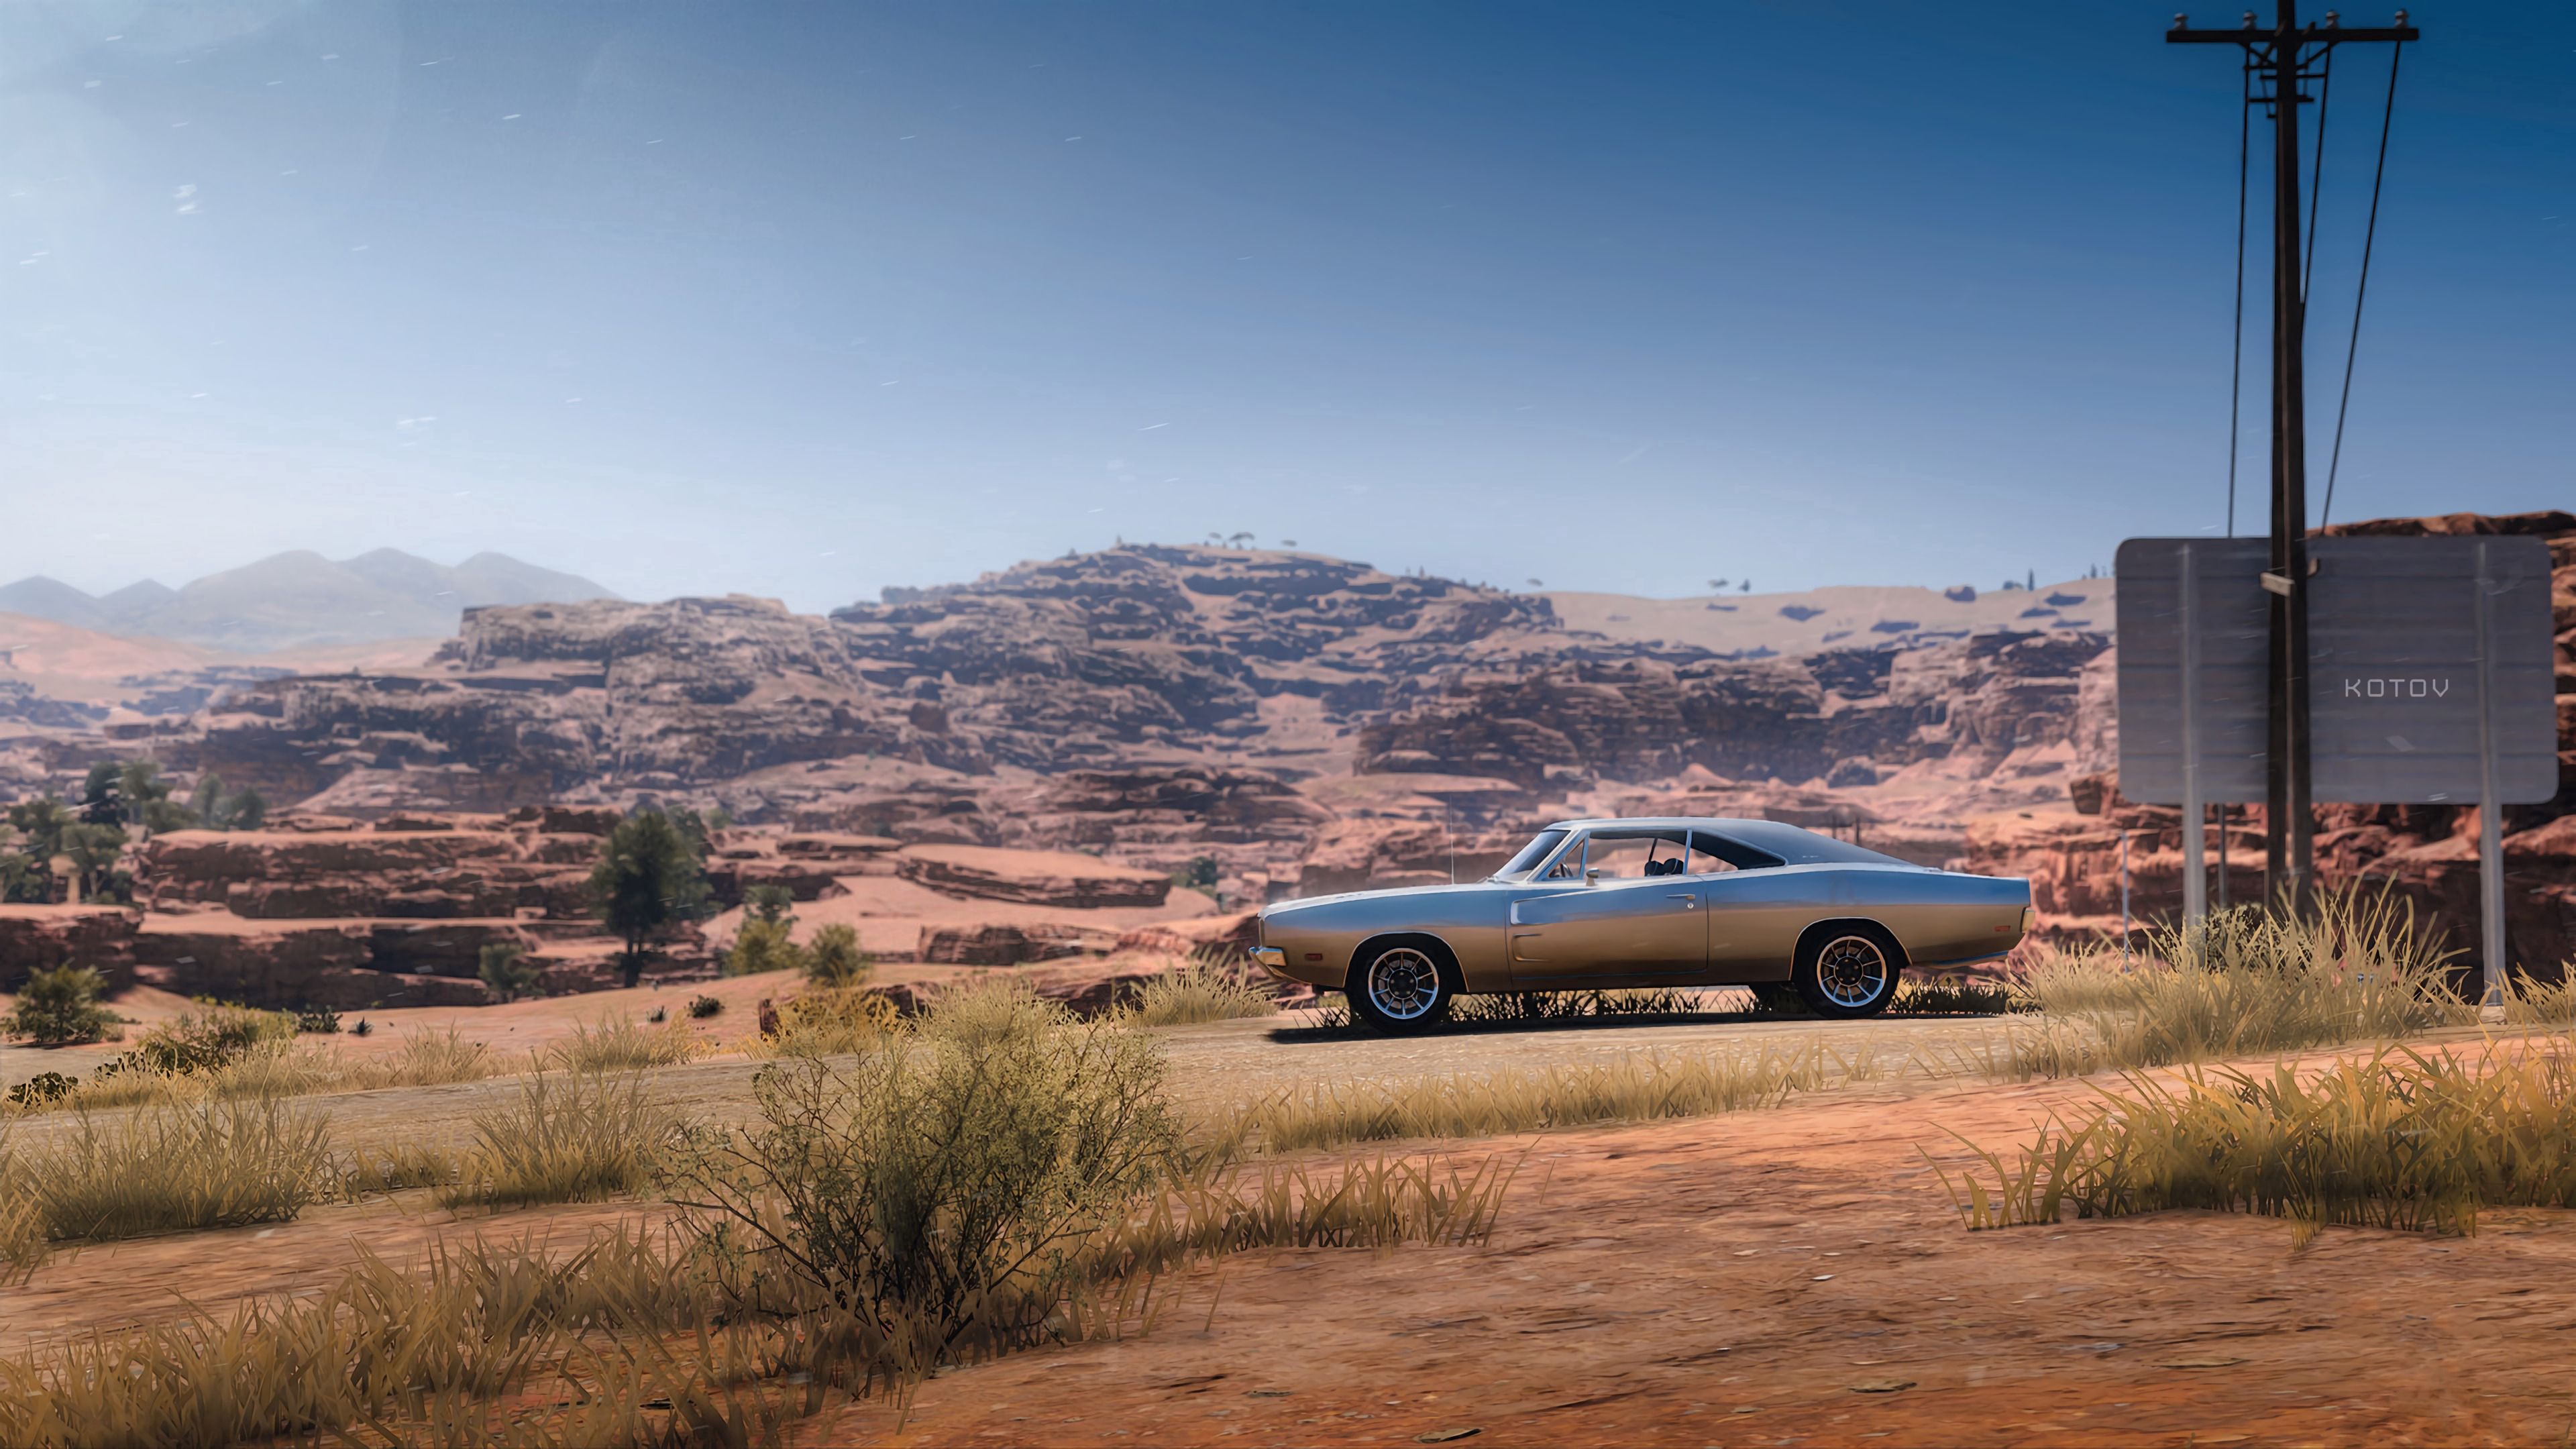 wallpapers desert, cars, car, machine, old, grey, dodge, dodge charger rt 69